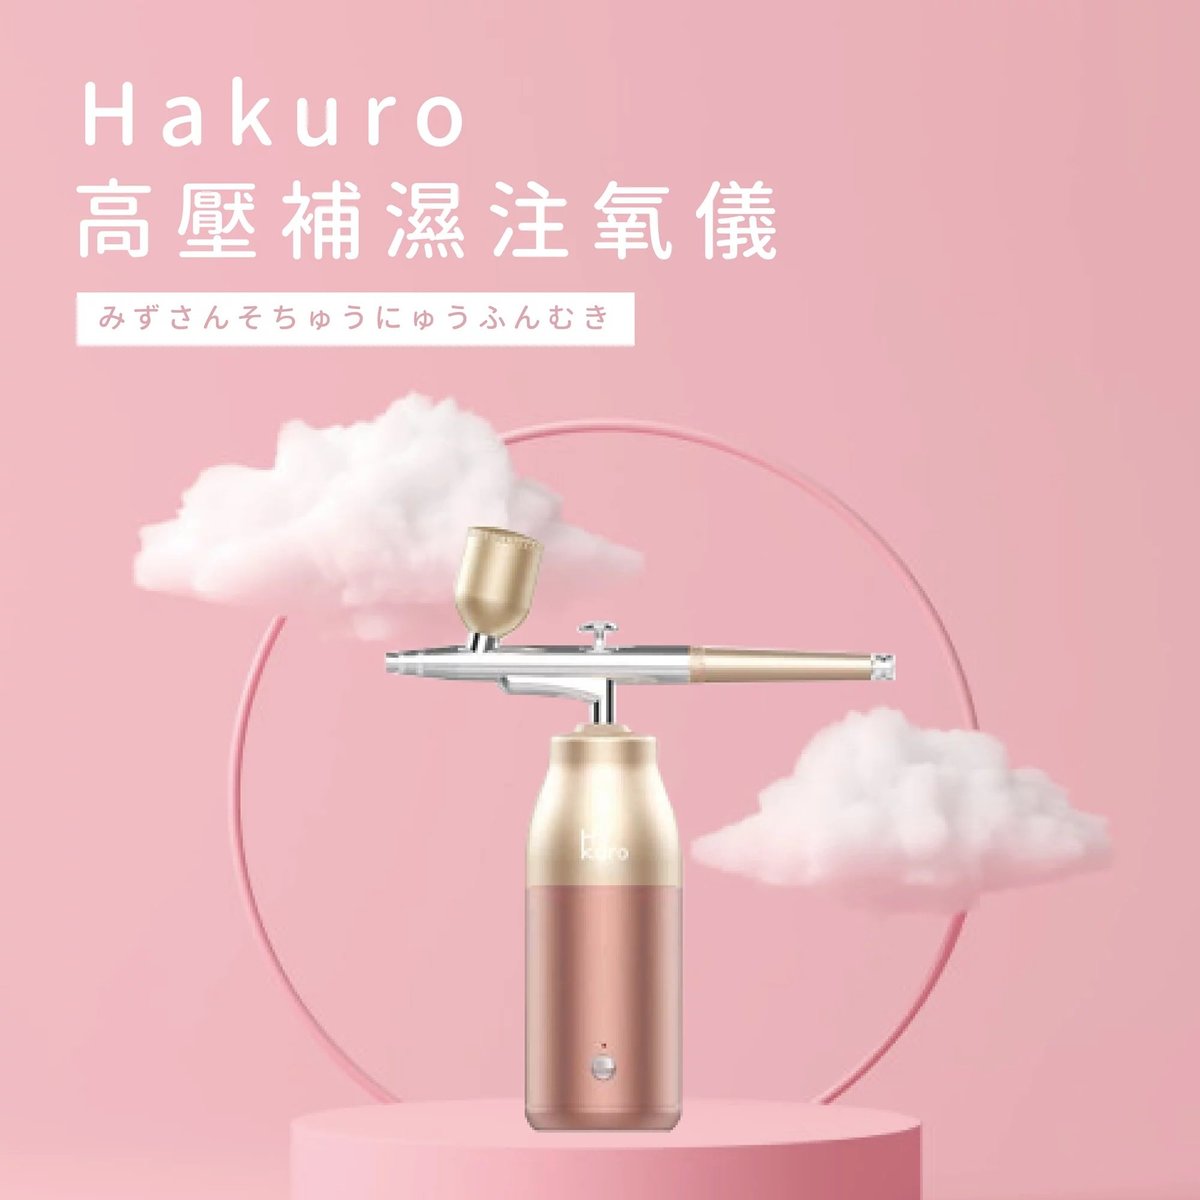 Hakuro - High-pressure humidification and oxygen injection device [Hong Kong licensed product]